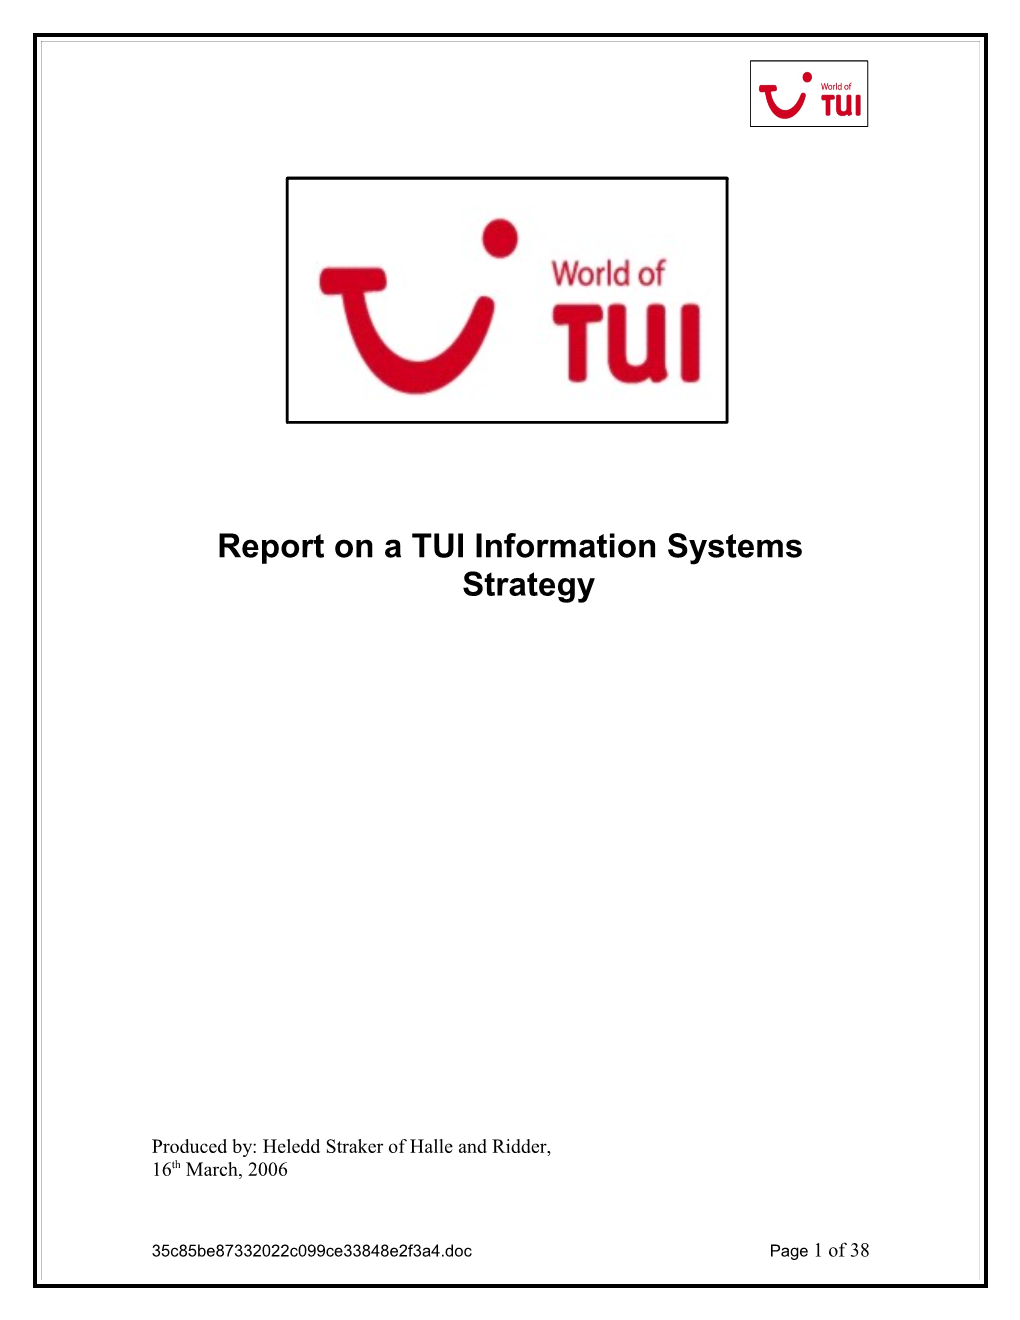 Report on a TUI Information Systems Strategy